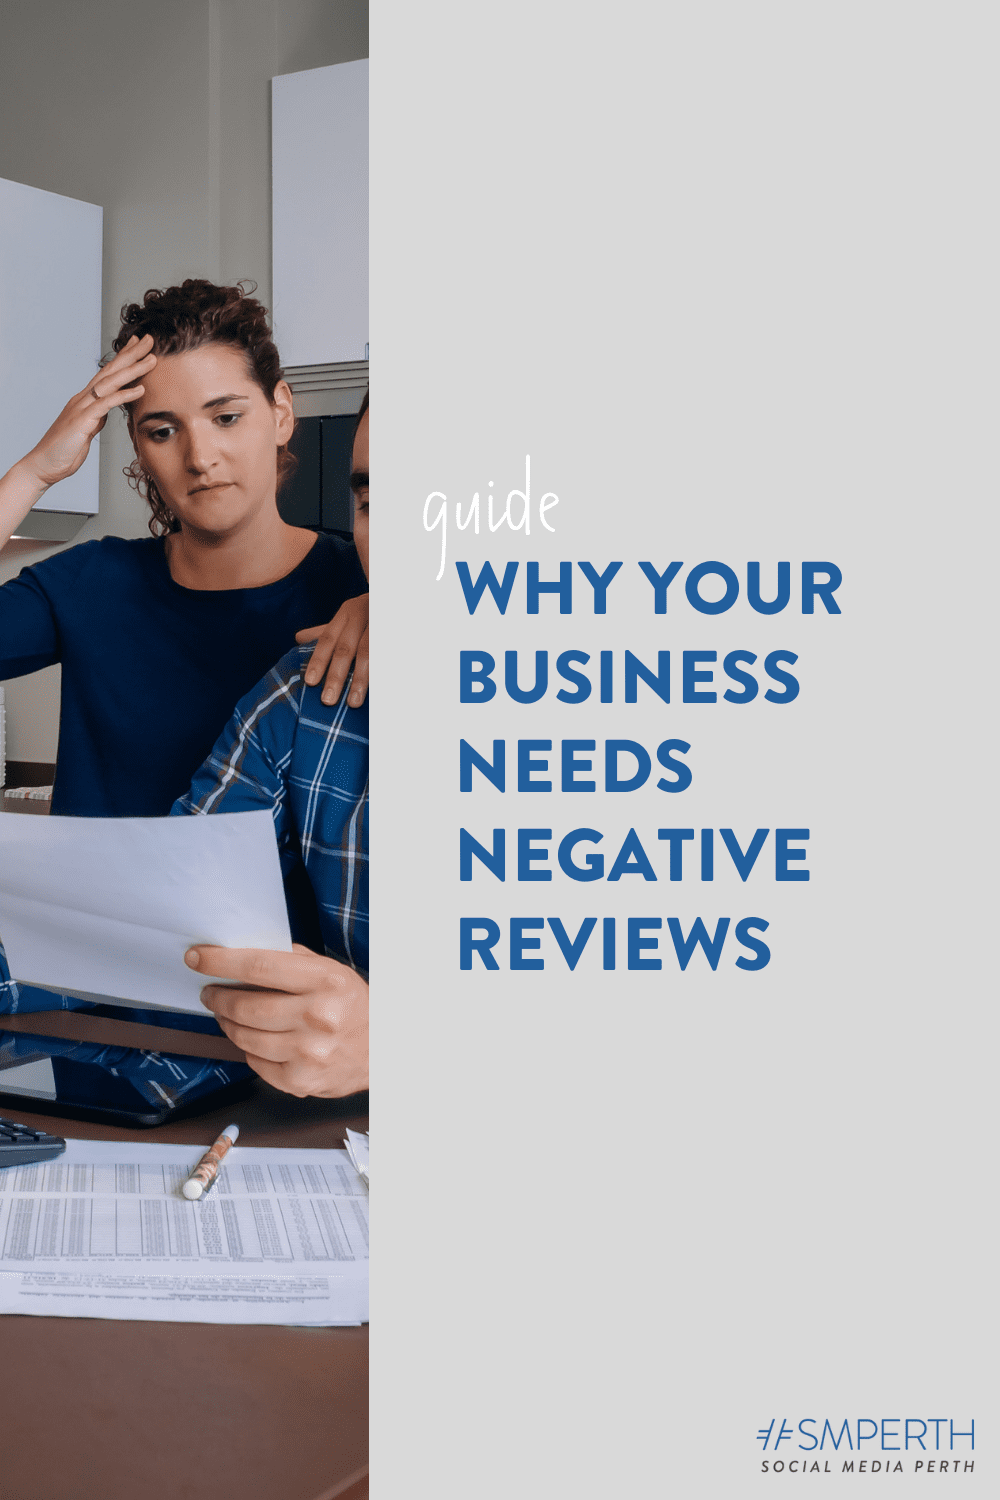 Why your business needs negative reviews